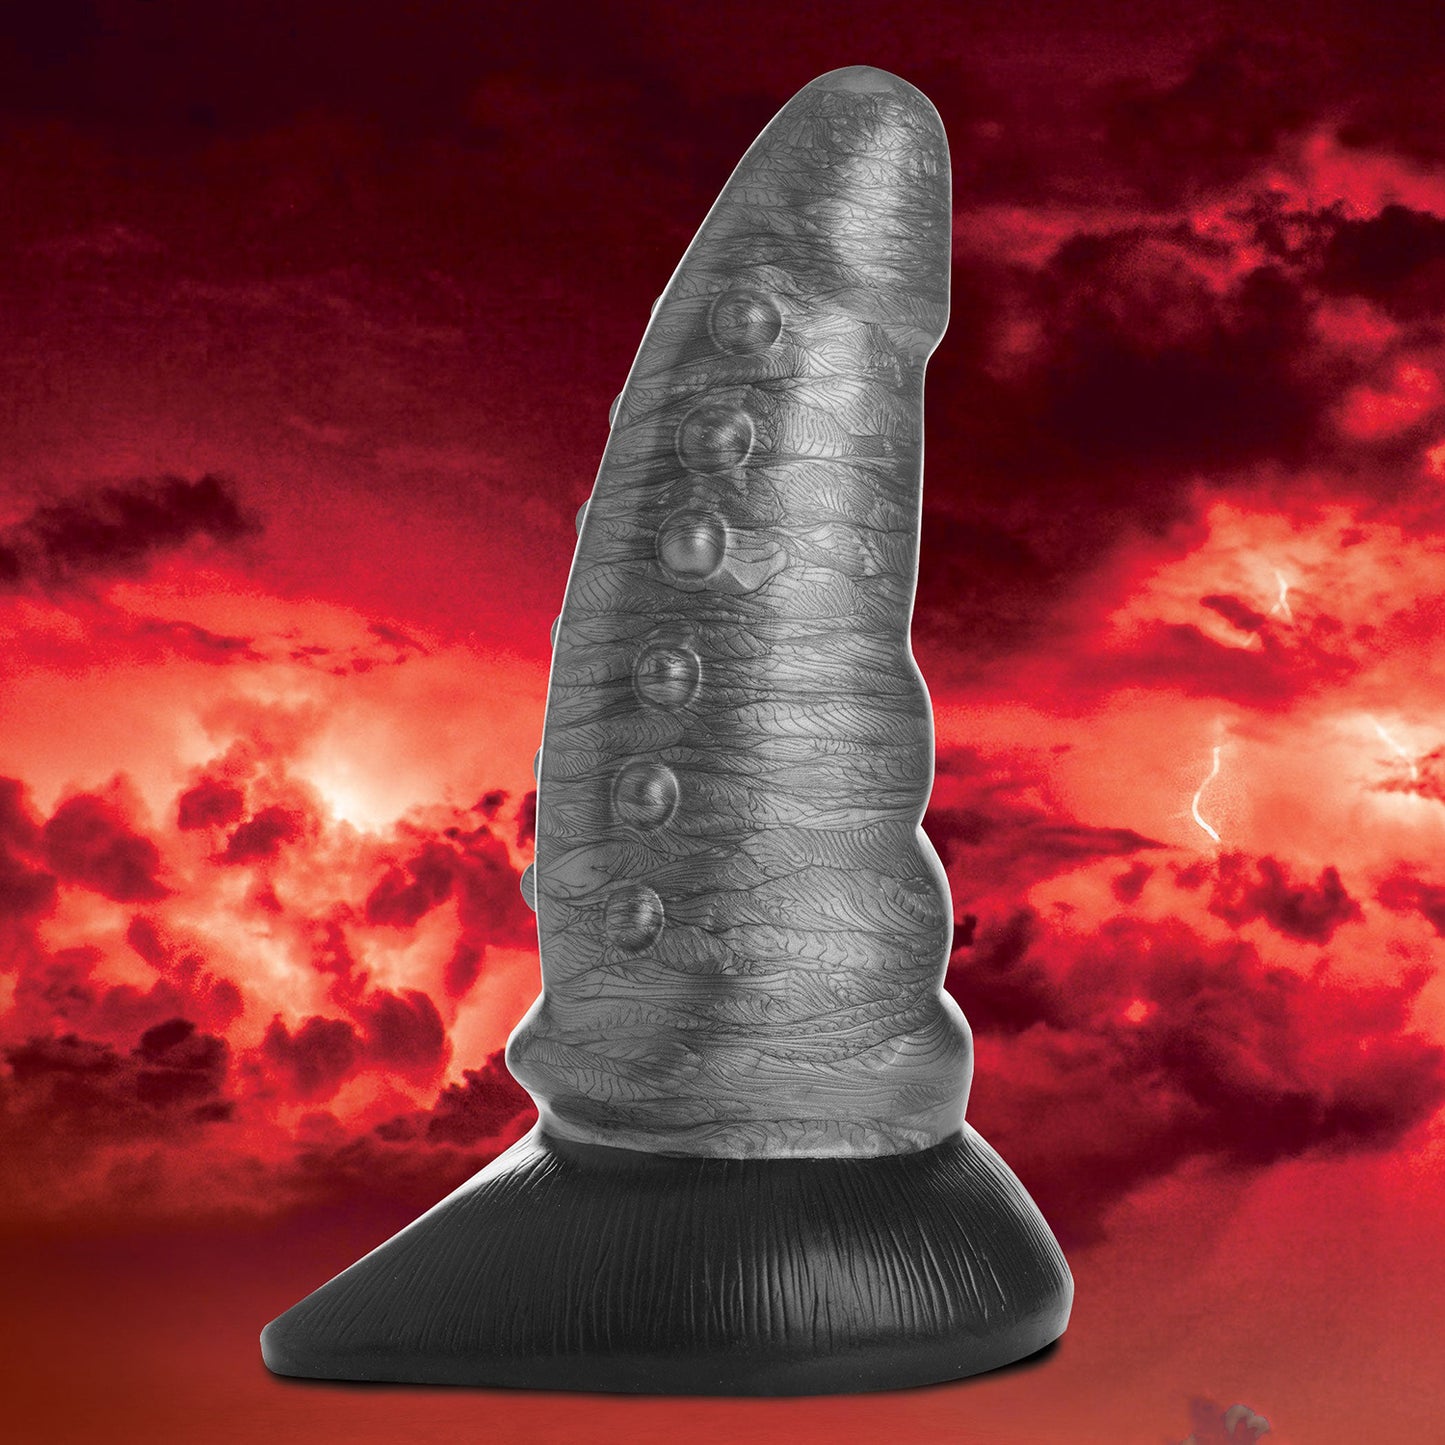 Beastly Tapered Bumpy Silicone Creature Dildo - Thorn & Feather